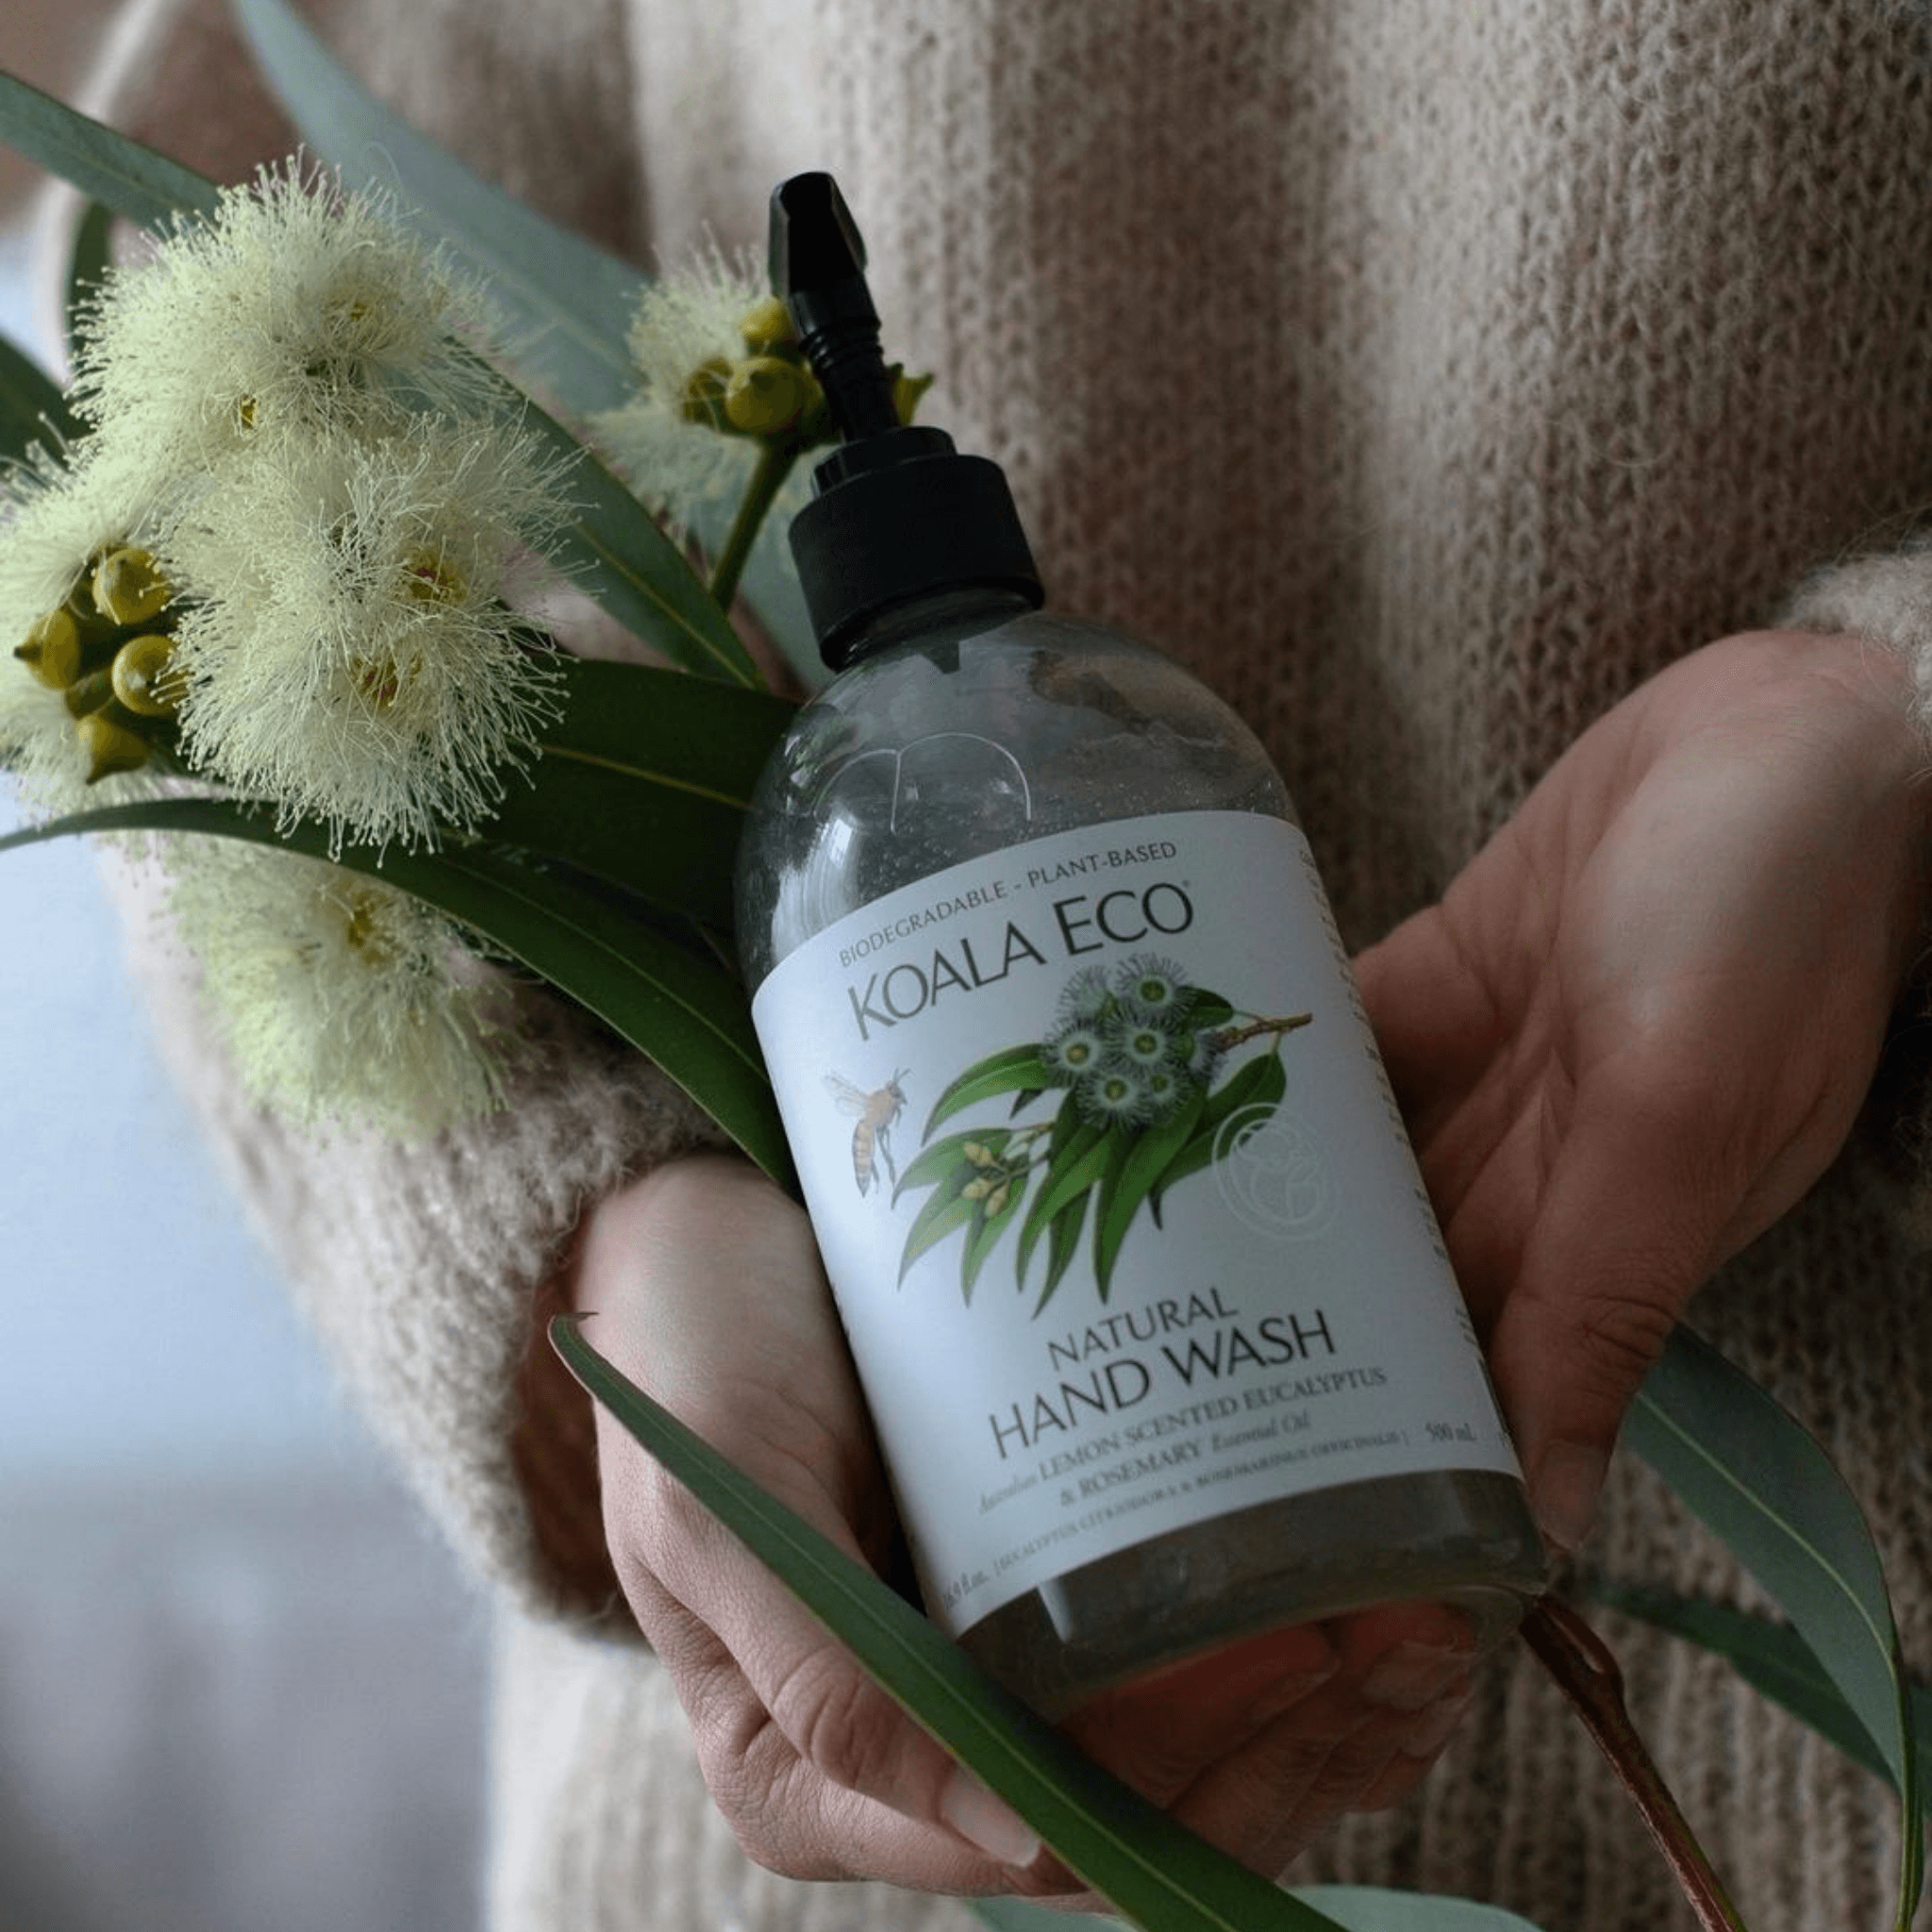 Natural Hand Wash - Scented with Australian Botanicals